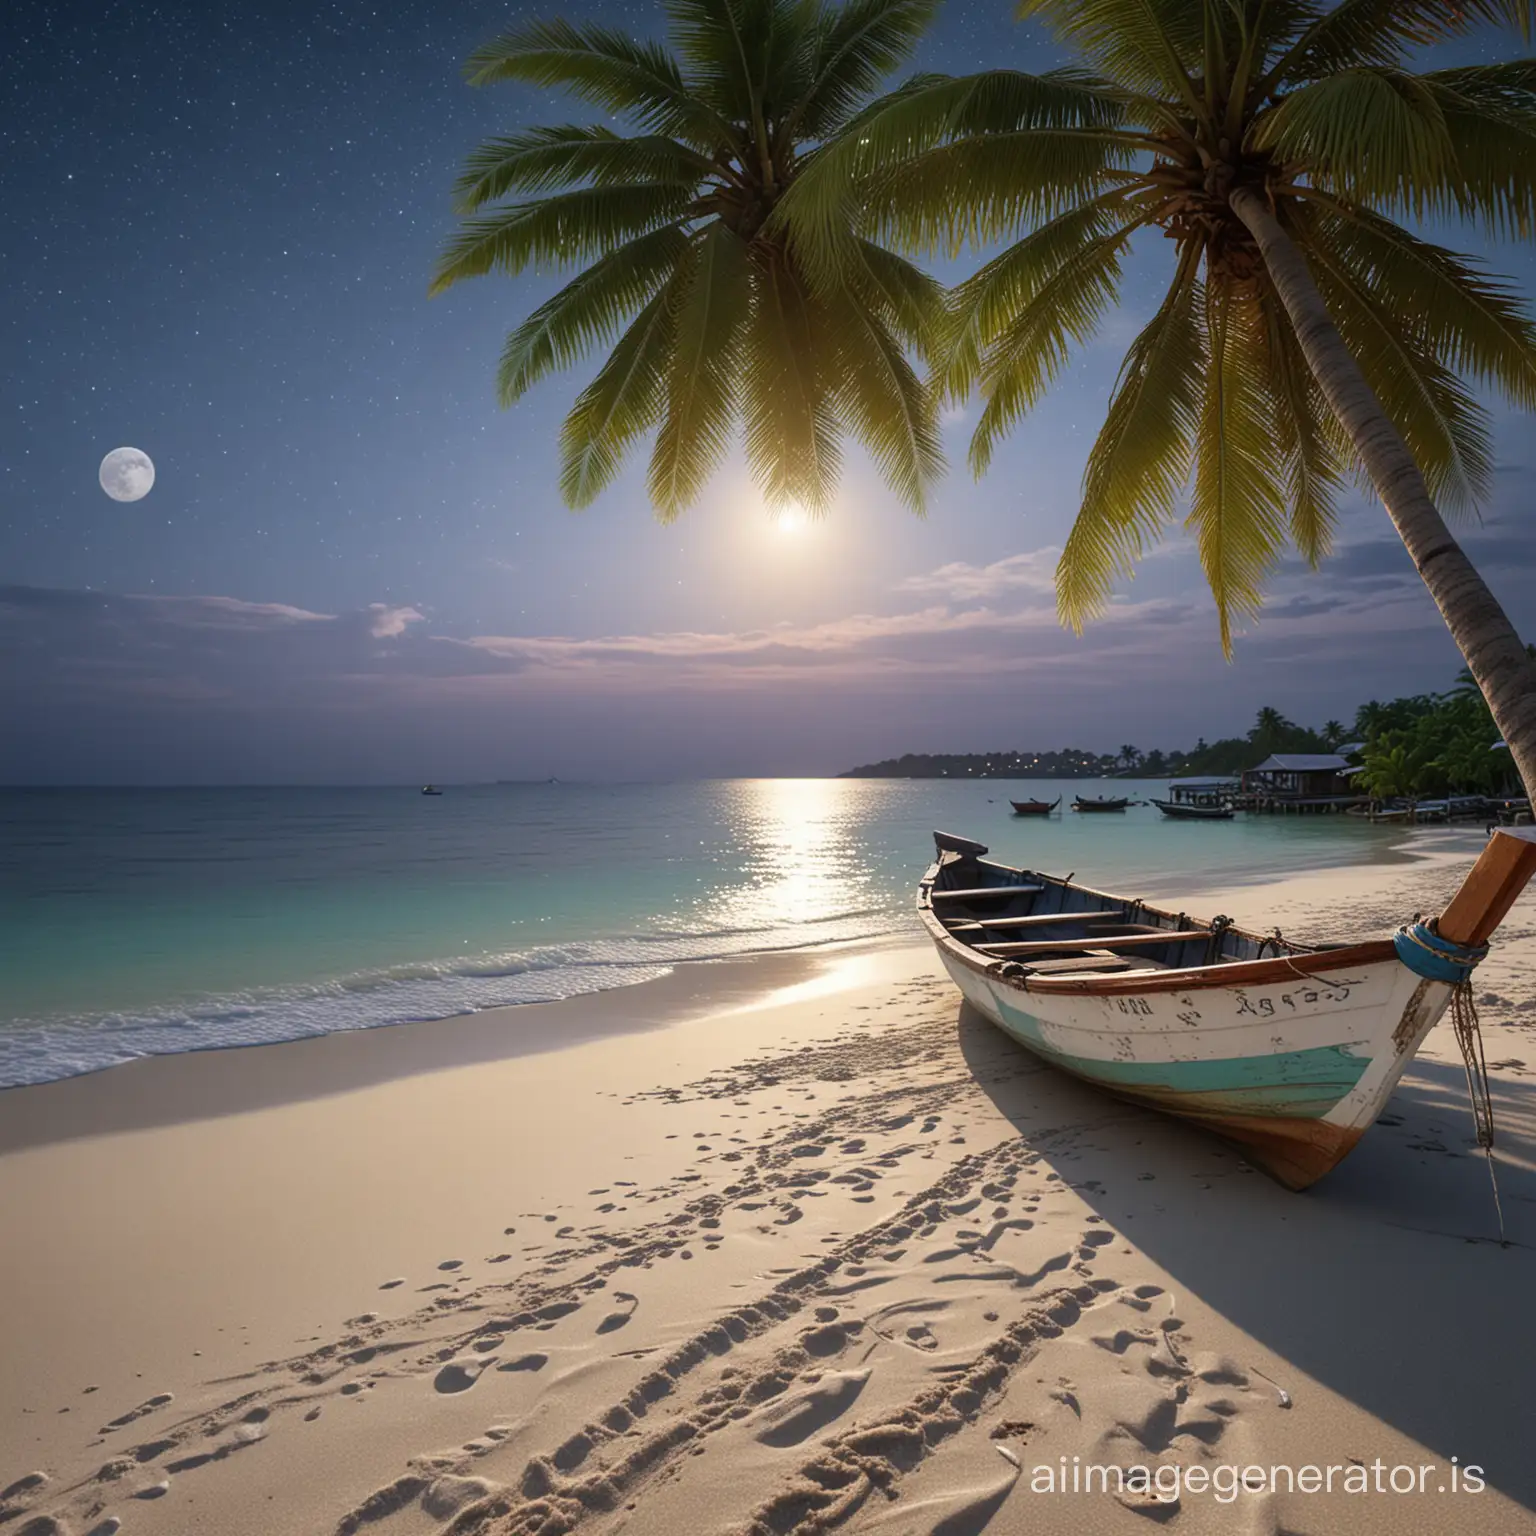 Tropical-Moonlit-Beach-Scene-with-Boat-and-Palm-Trees